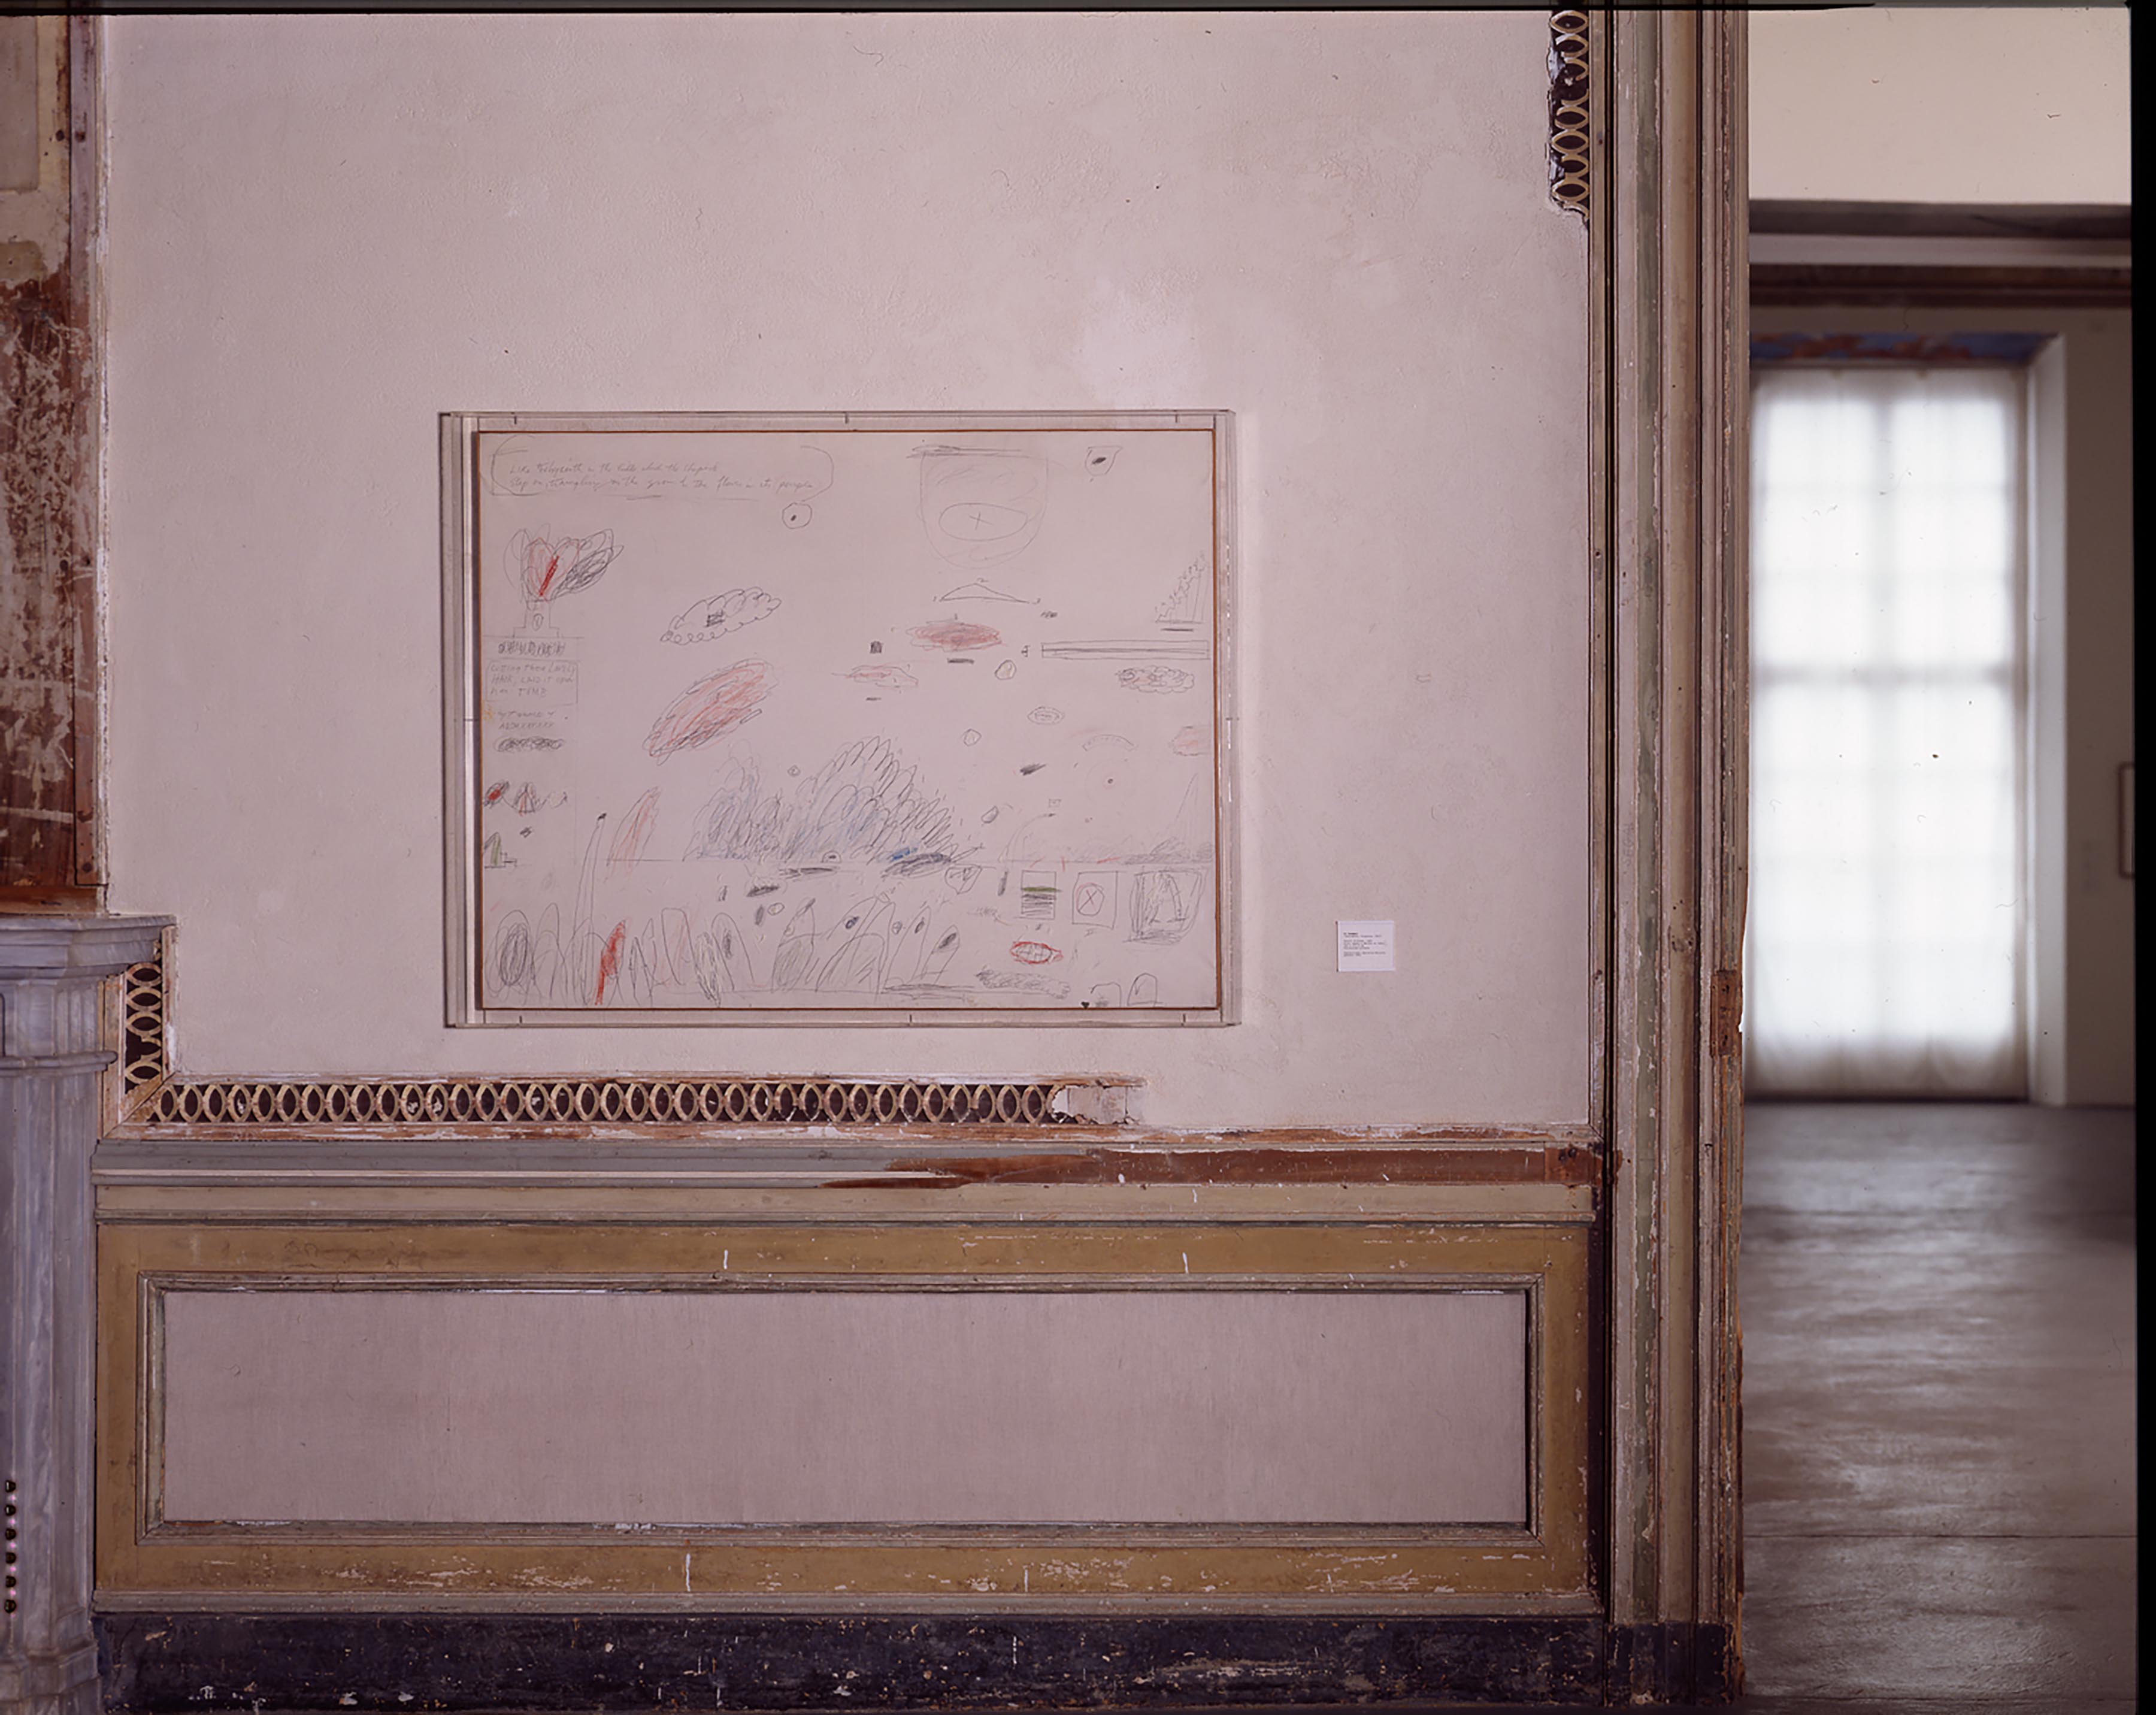 Cy Twombly, Scuola d'Atene, 1960  